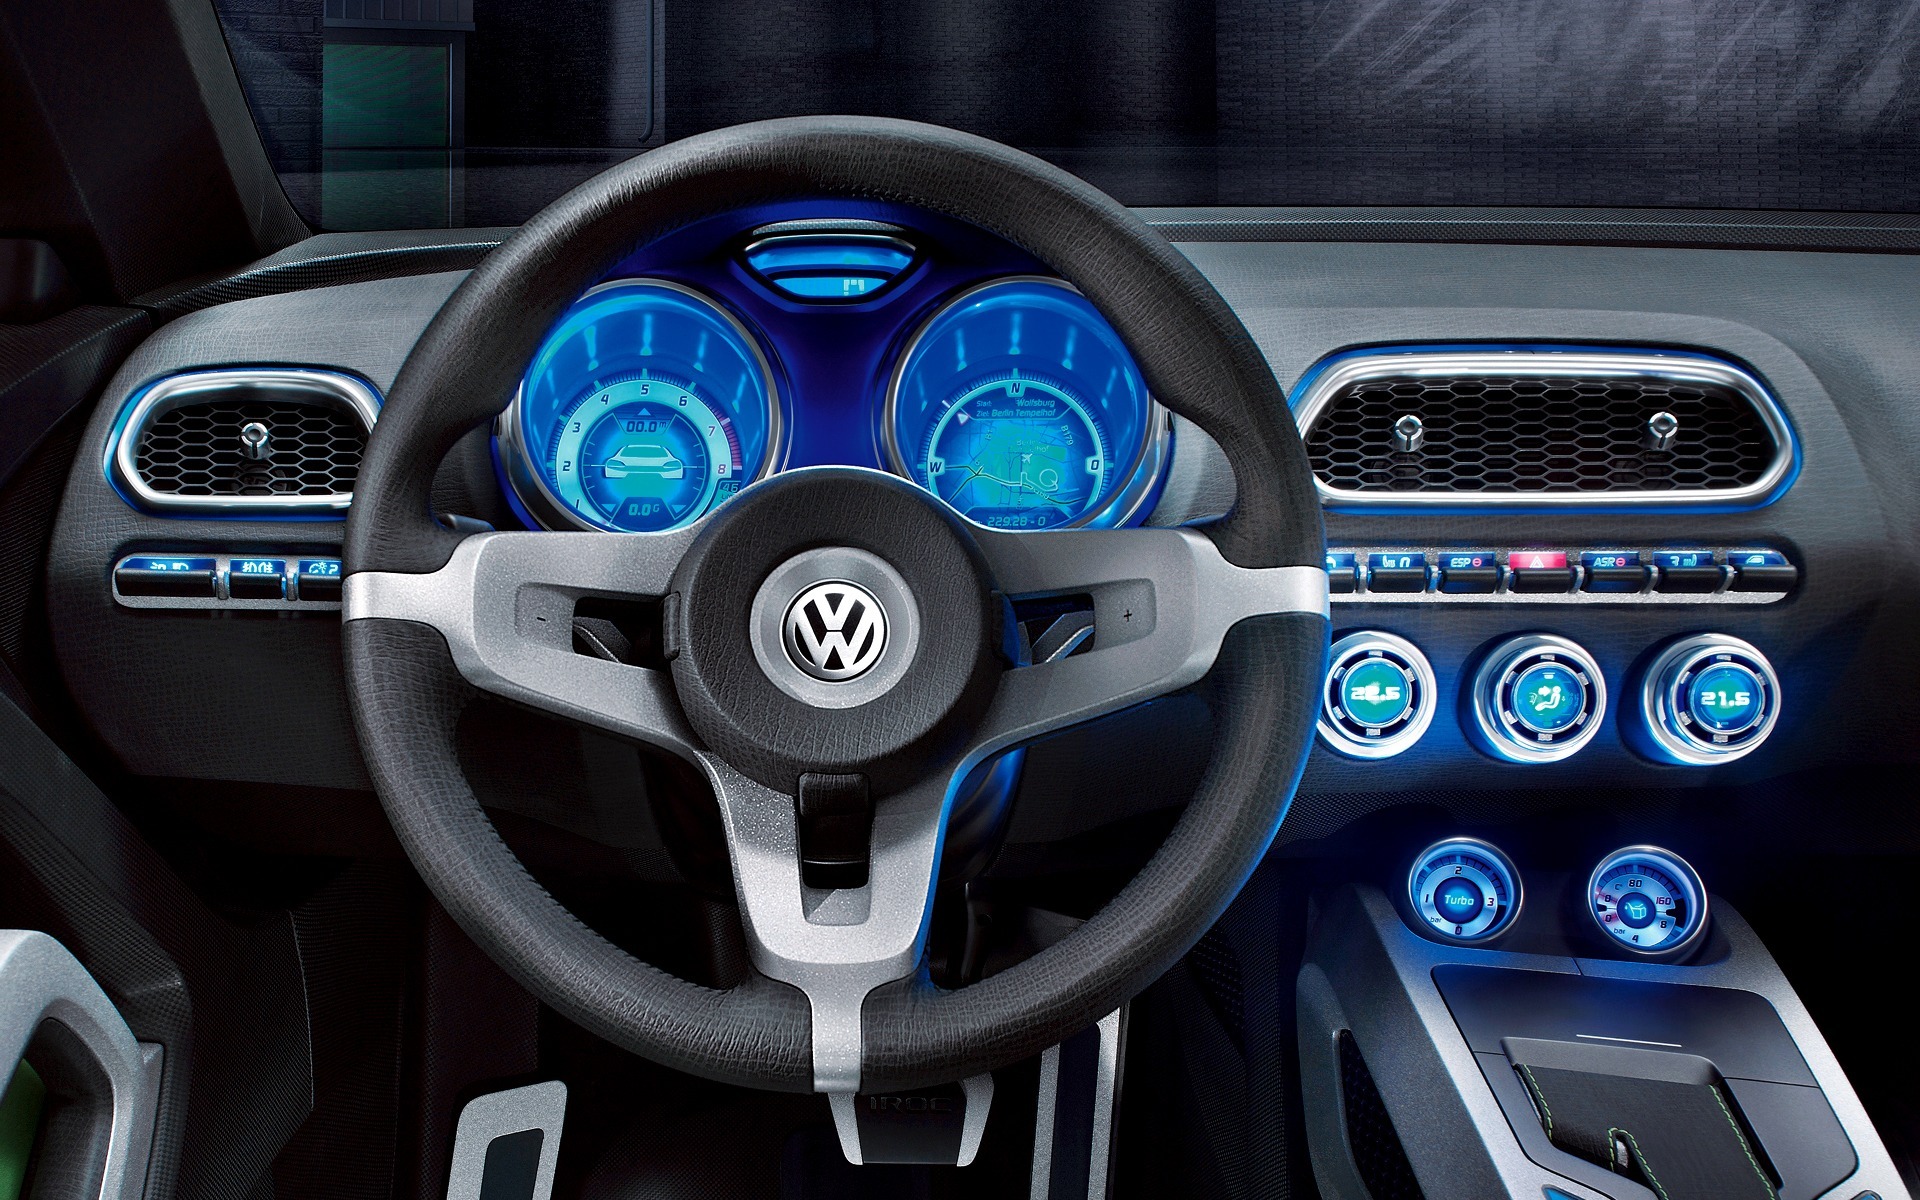 Volkswagen Concept Car tapety (2) #6 - 1920x1200